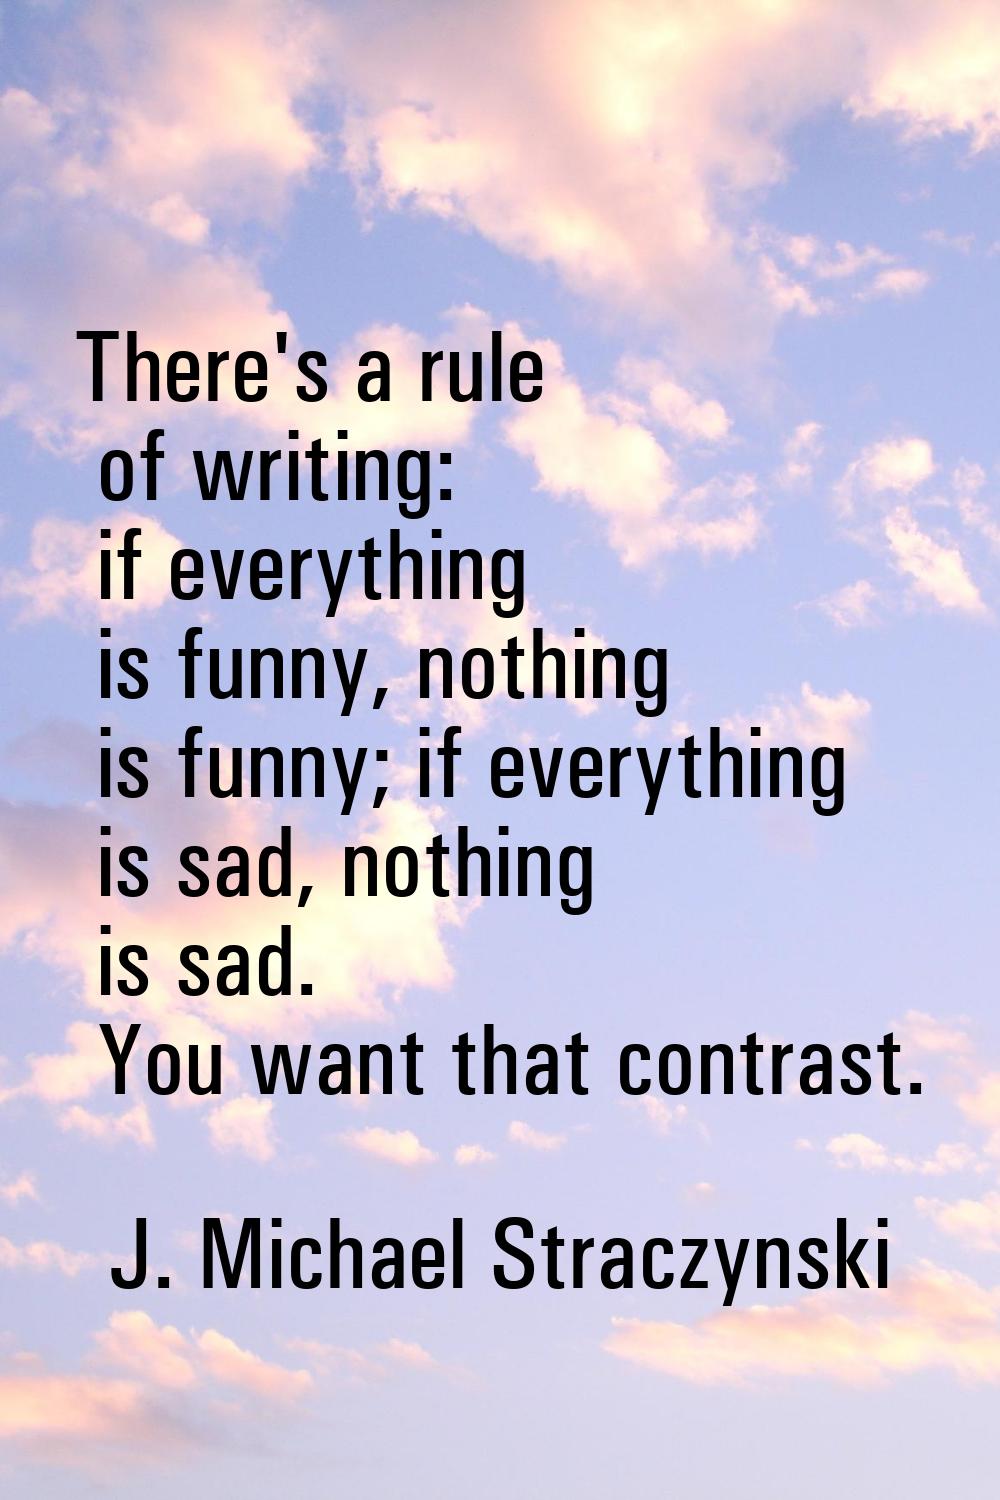 There's a rule of writing: if everything is funny, nothing is funny; if everything is sad, nothing 